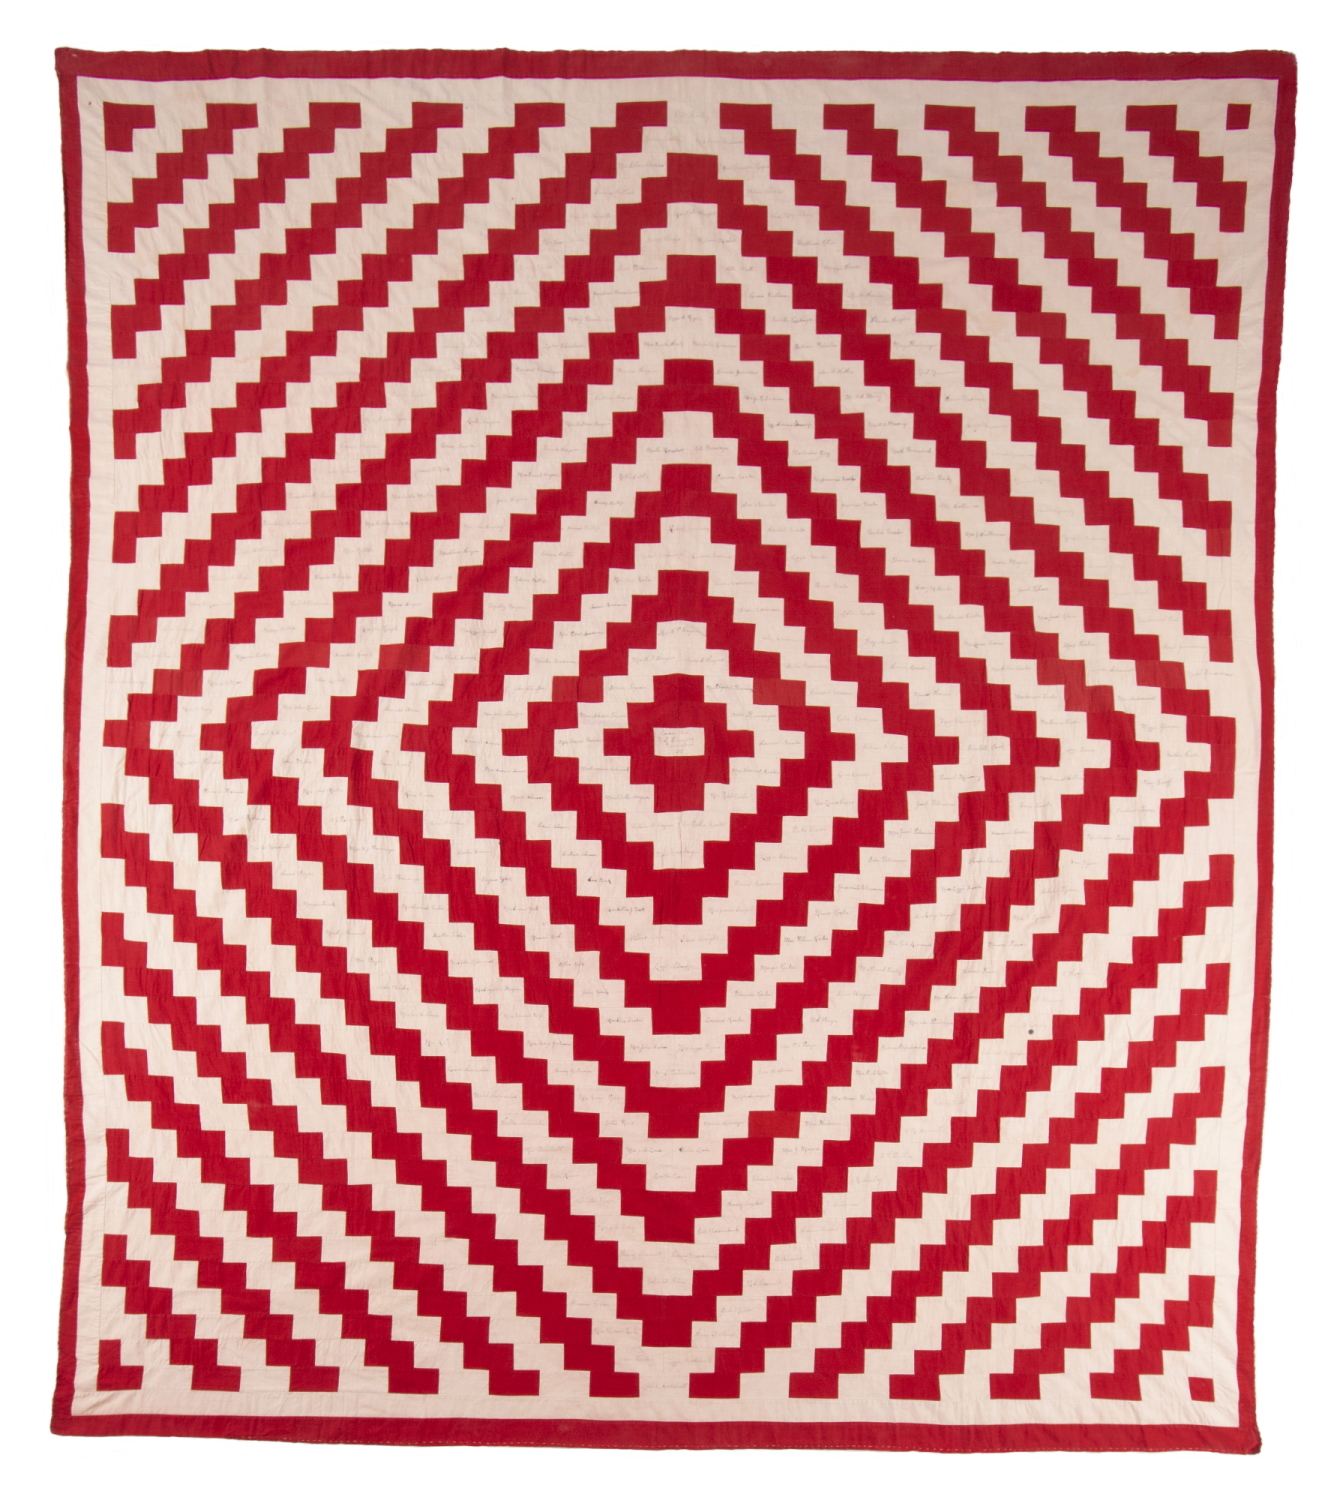 RED & WHITE, SUNSHINE & SHADOWS, SIGNATURE QUILT, MADE BY THE LADIES AID SOCIETY CHAPTER AT THE UNITED EVANGELICAL CHURCH IN ROYERSFORD, PENNSYLVANIA, MONTGOMERY COUNTY, DATED 1901